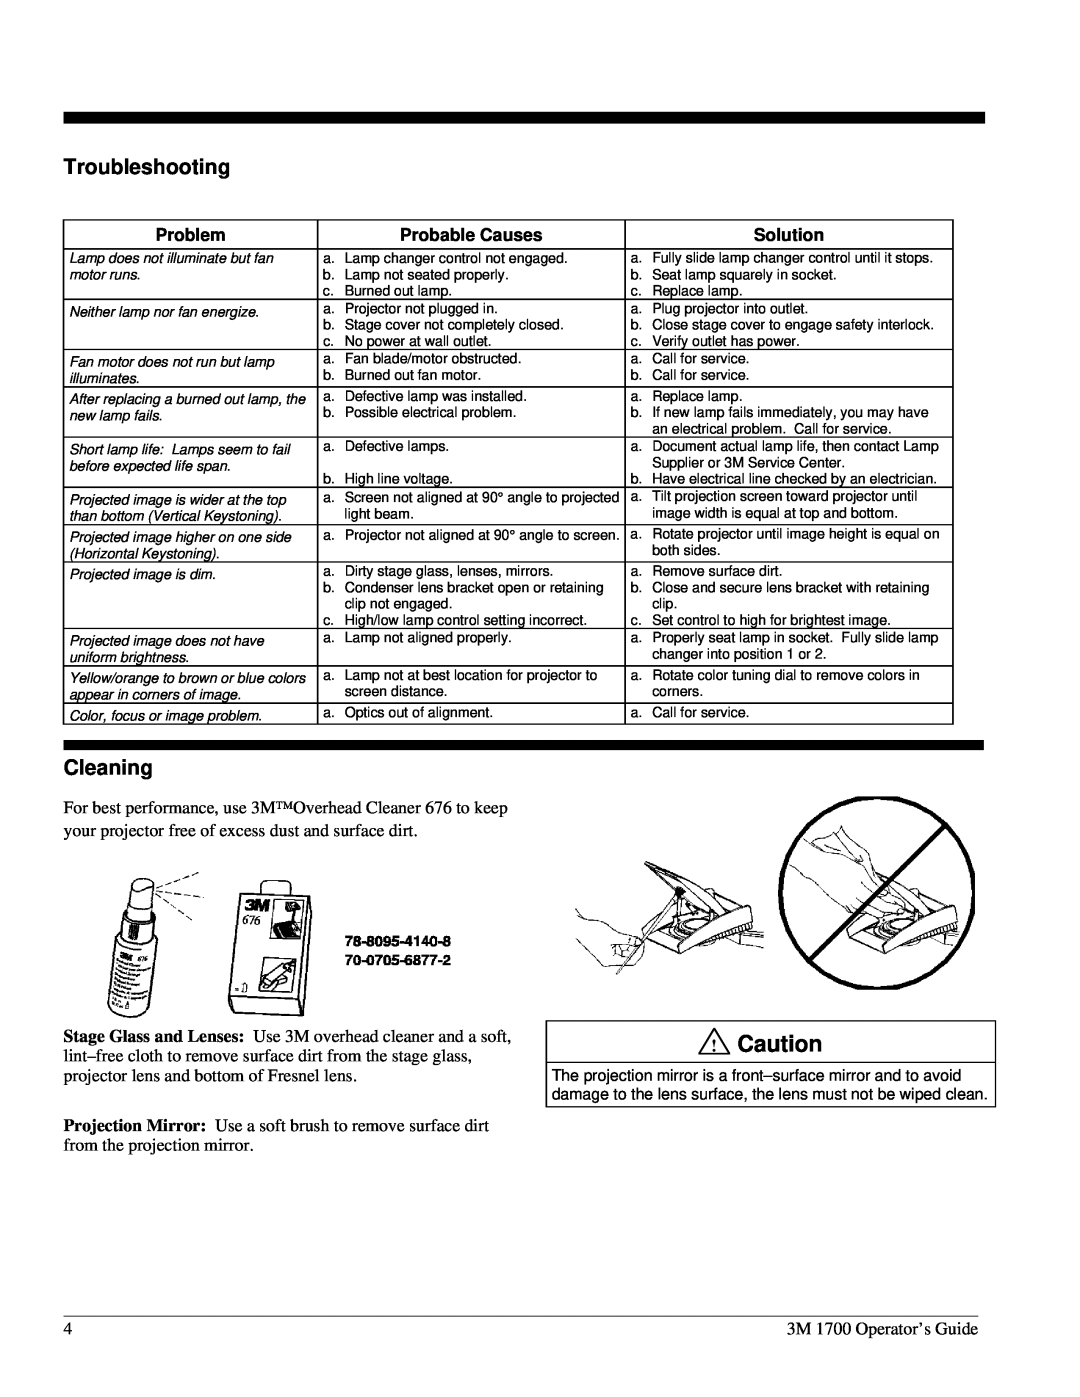 3M 1700 operating instructions Troubleshooting, Cleaning, Problem, Probable Causes, Solution 